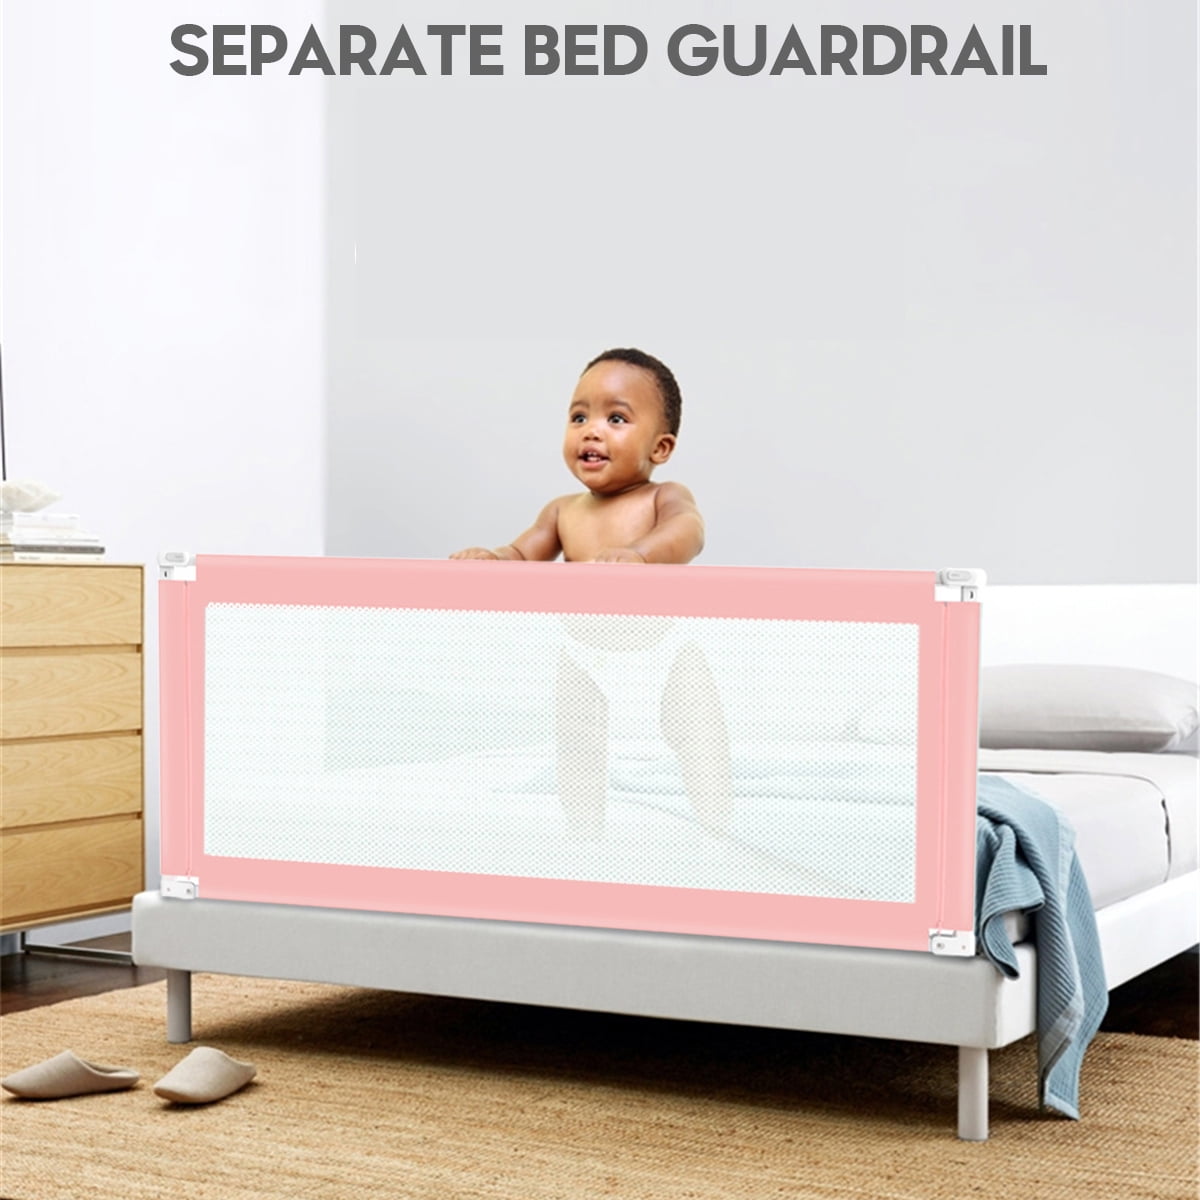 Anti-Fall Bed Safety Guardrail Guards Folding Toddler Safety Protection Guard Gray, 180cm Queiting Kids Child Bed Rail